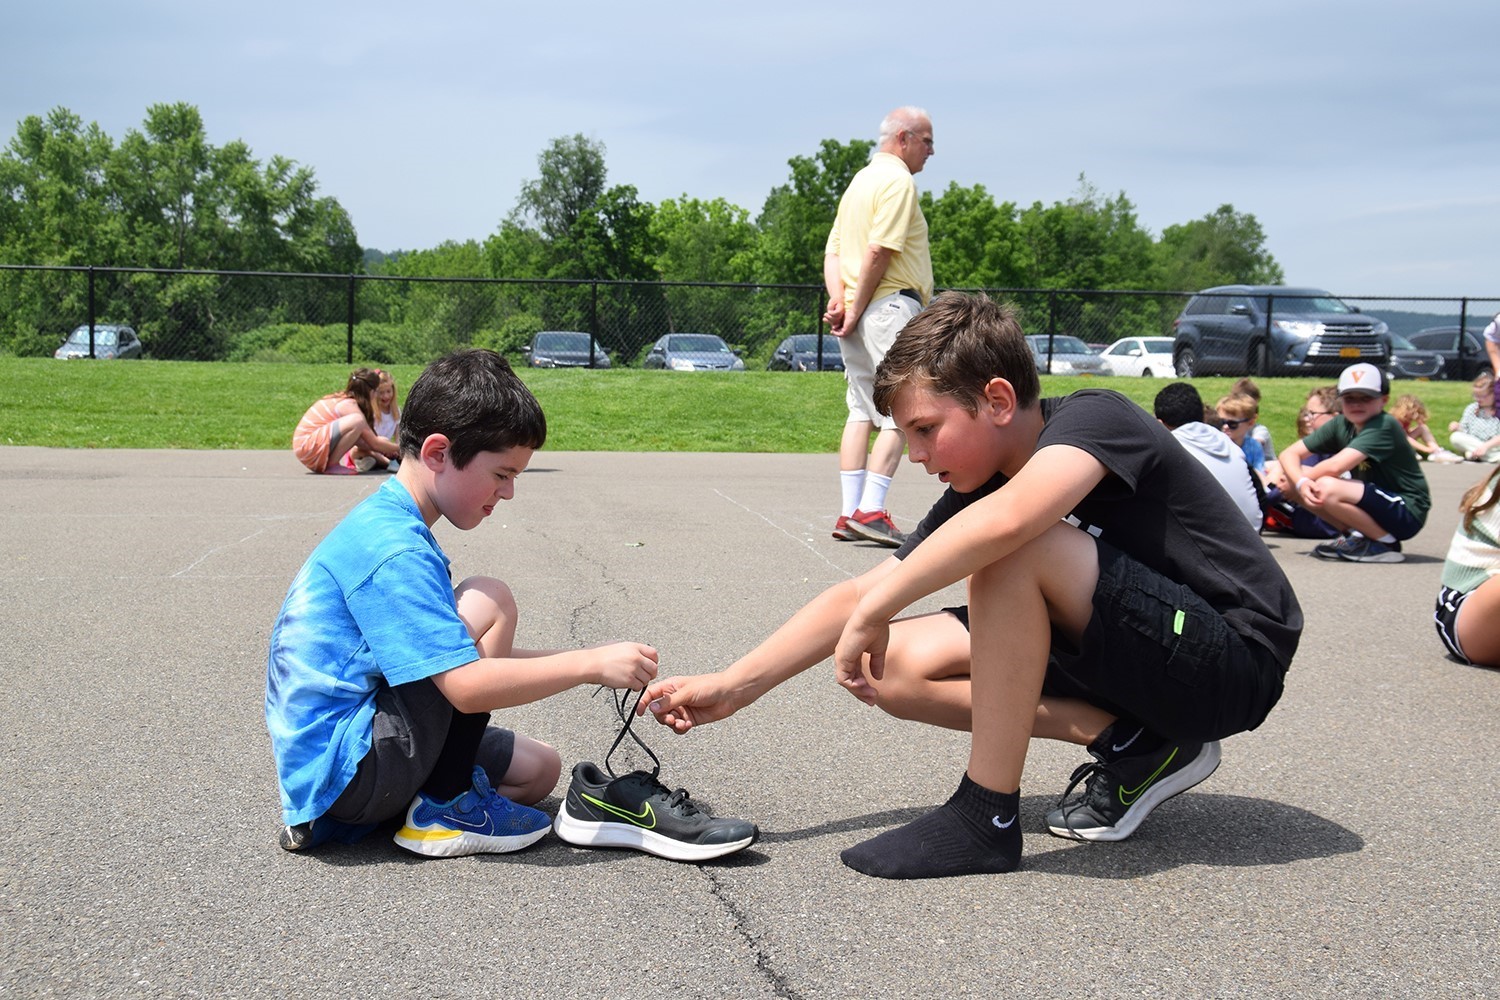 A fifth-grade boy patiently shows a Kindergarten boy how to tie his shoes on June 16, 2022.